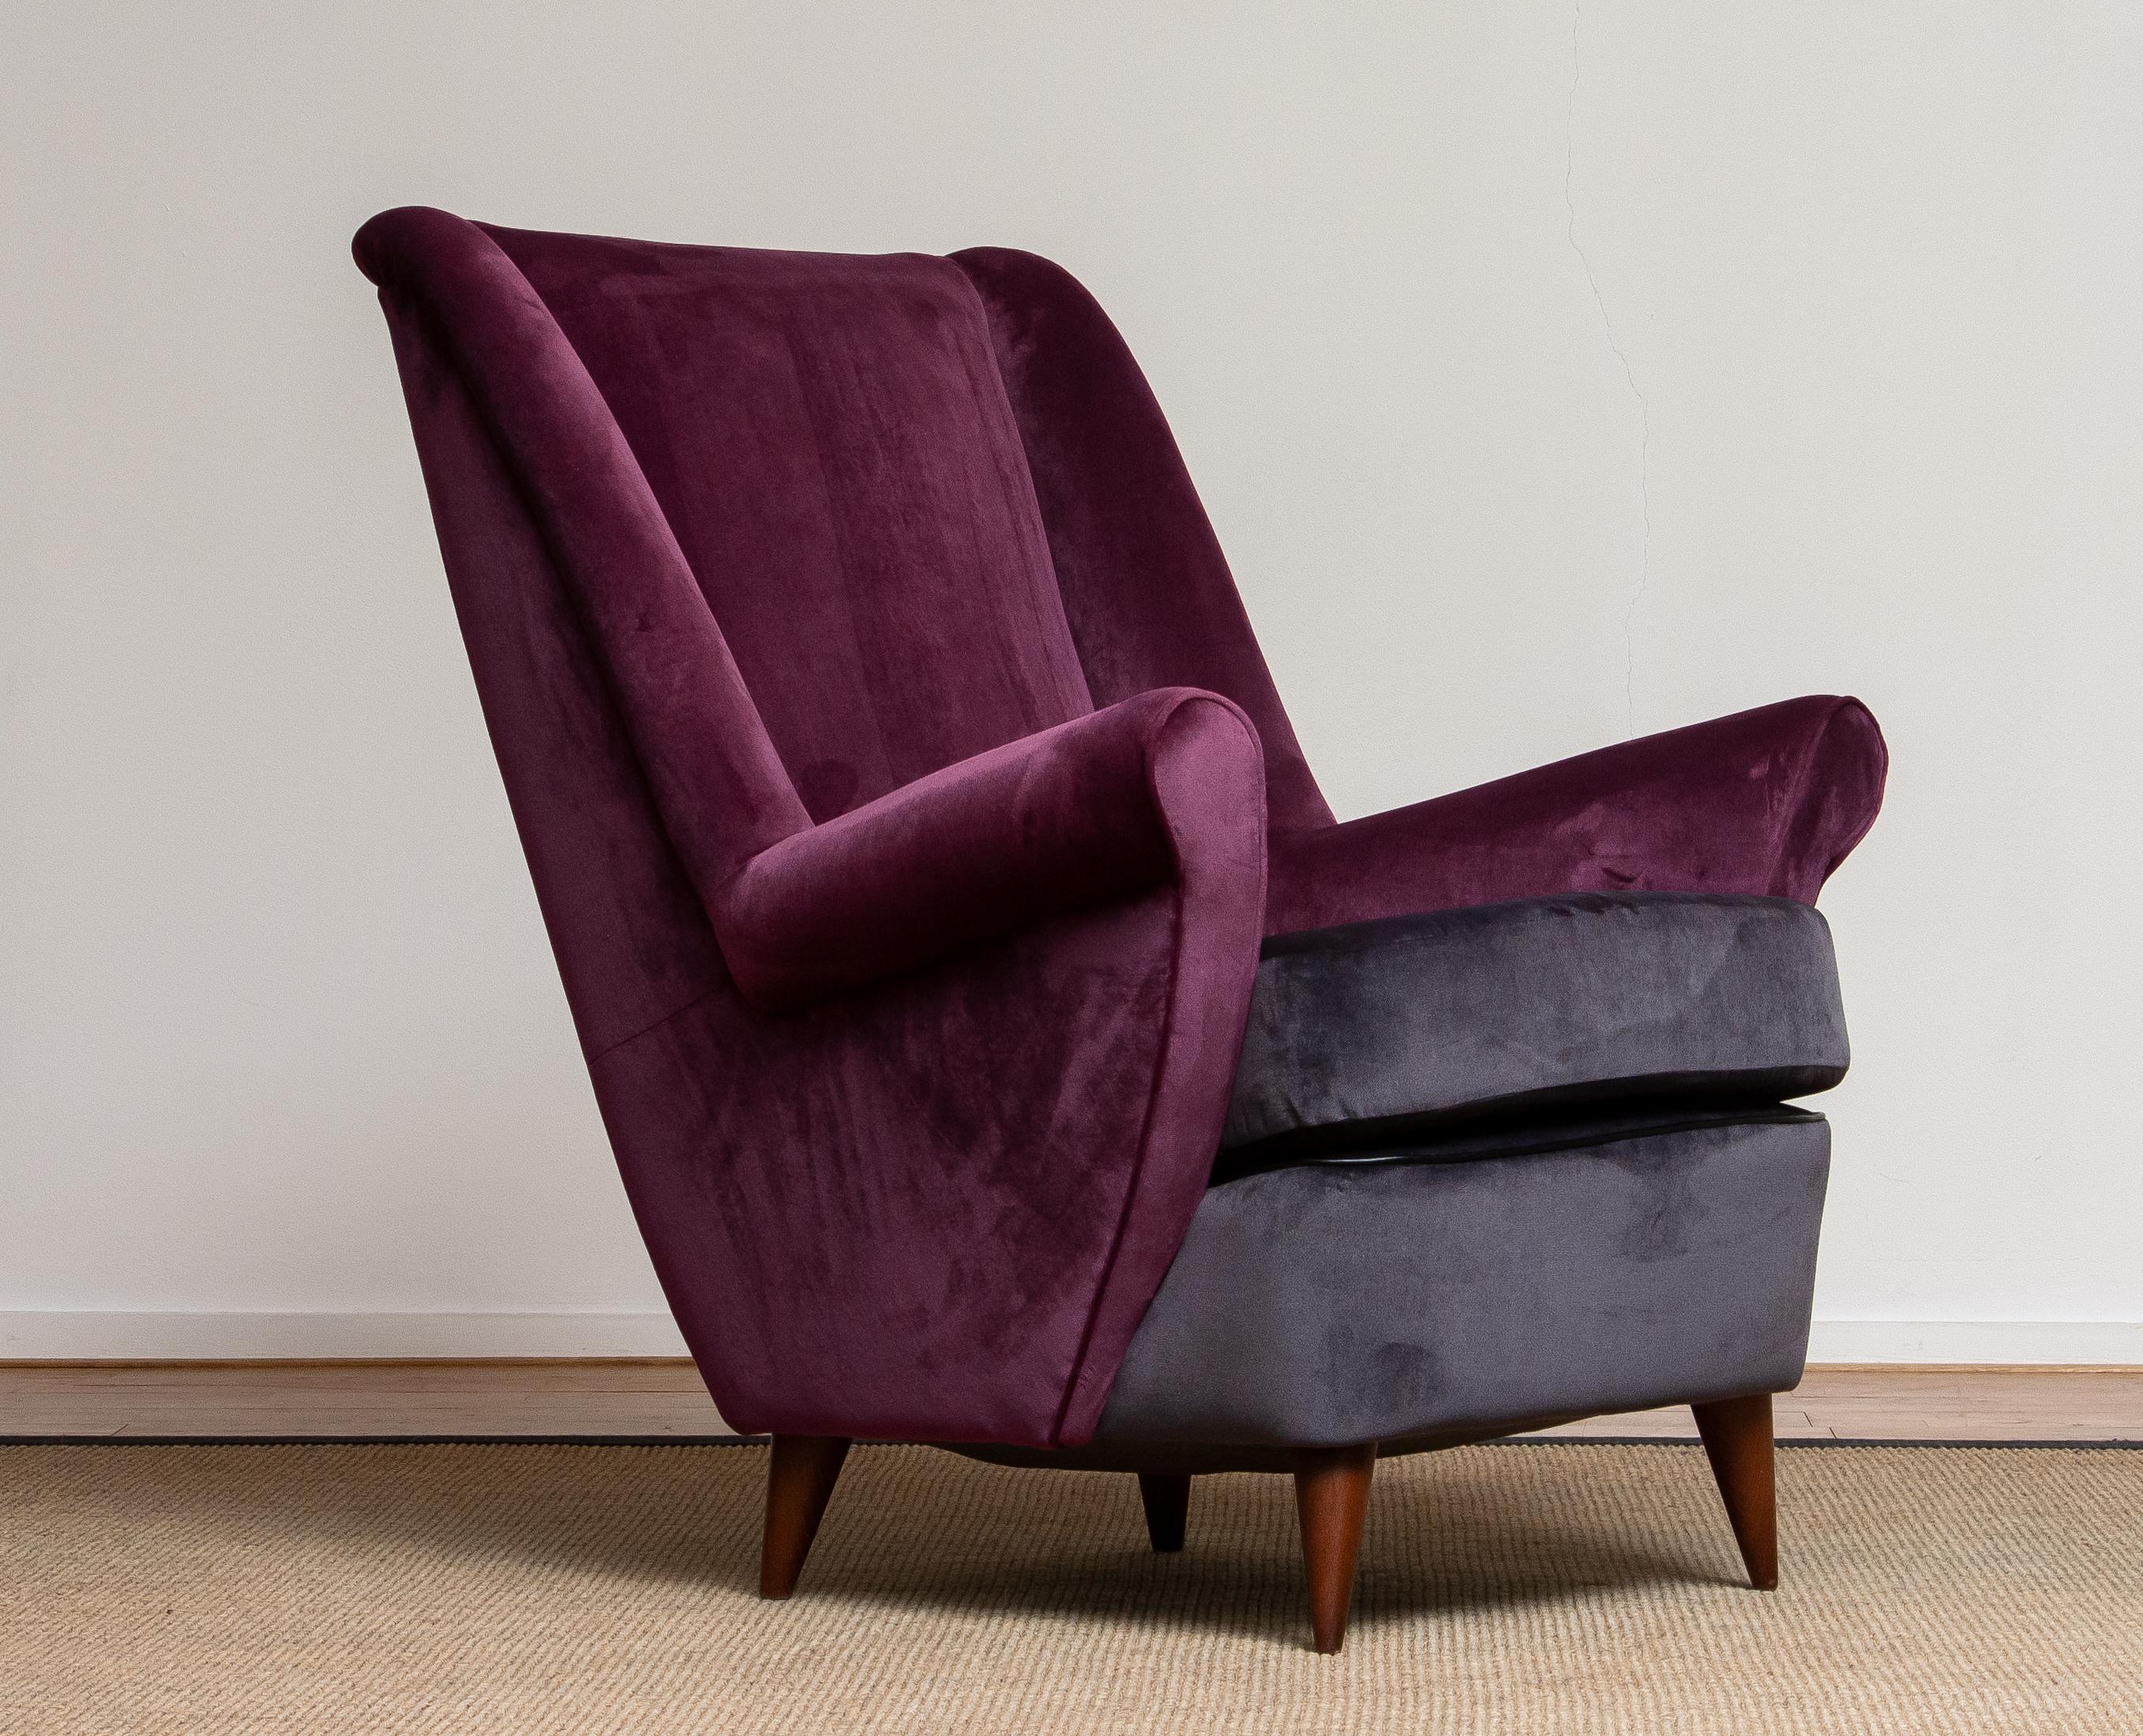 Absolutely beautiful 1950s lounge or easy chair designed by Gio Ponti and made by ISA in Bergamo in Italy. The fabulous color combination and choice of fabric, magenta and dark gray, makes this chair a real eye catcher. This chairs are completely